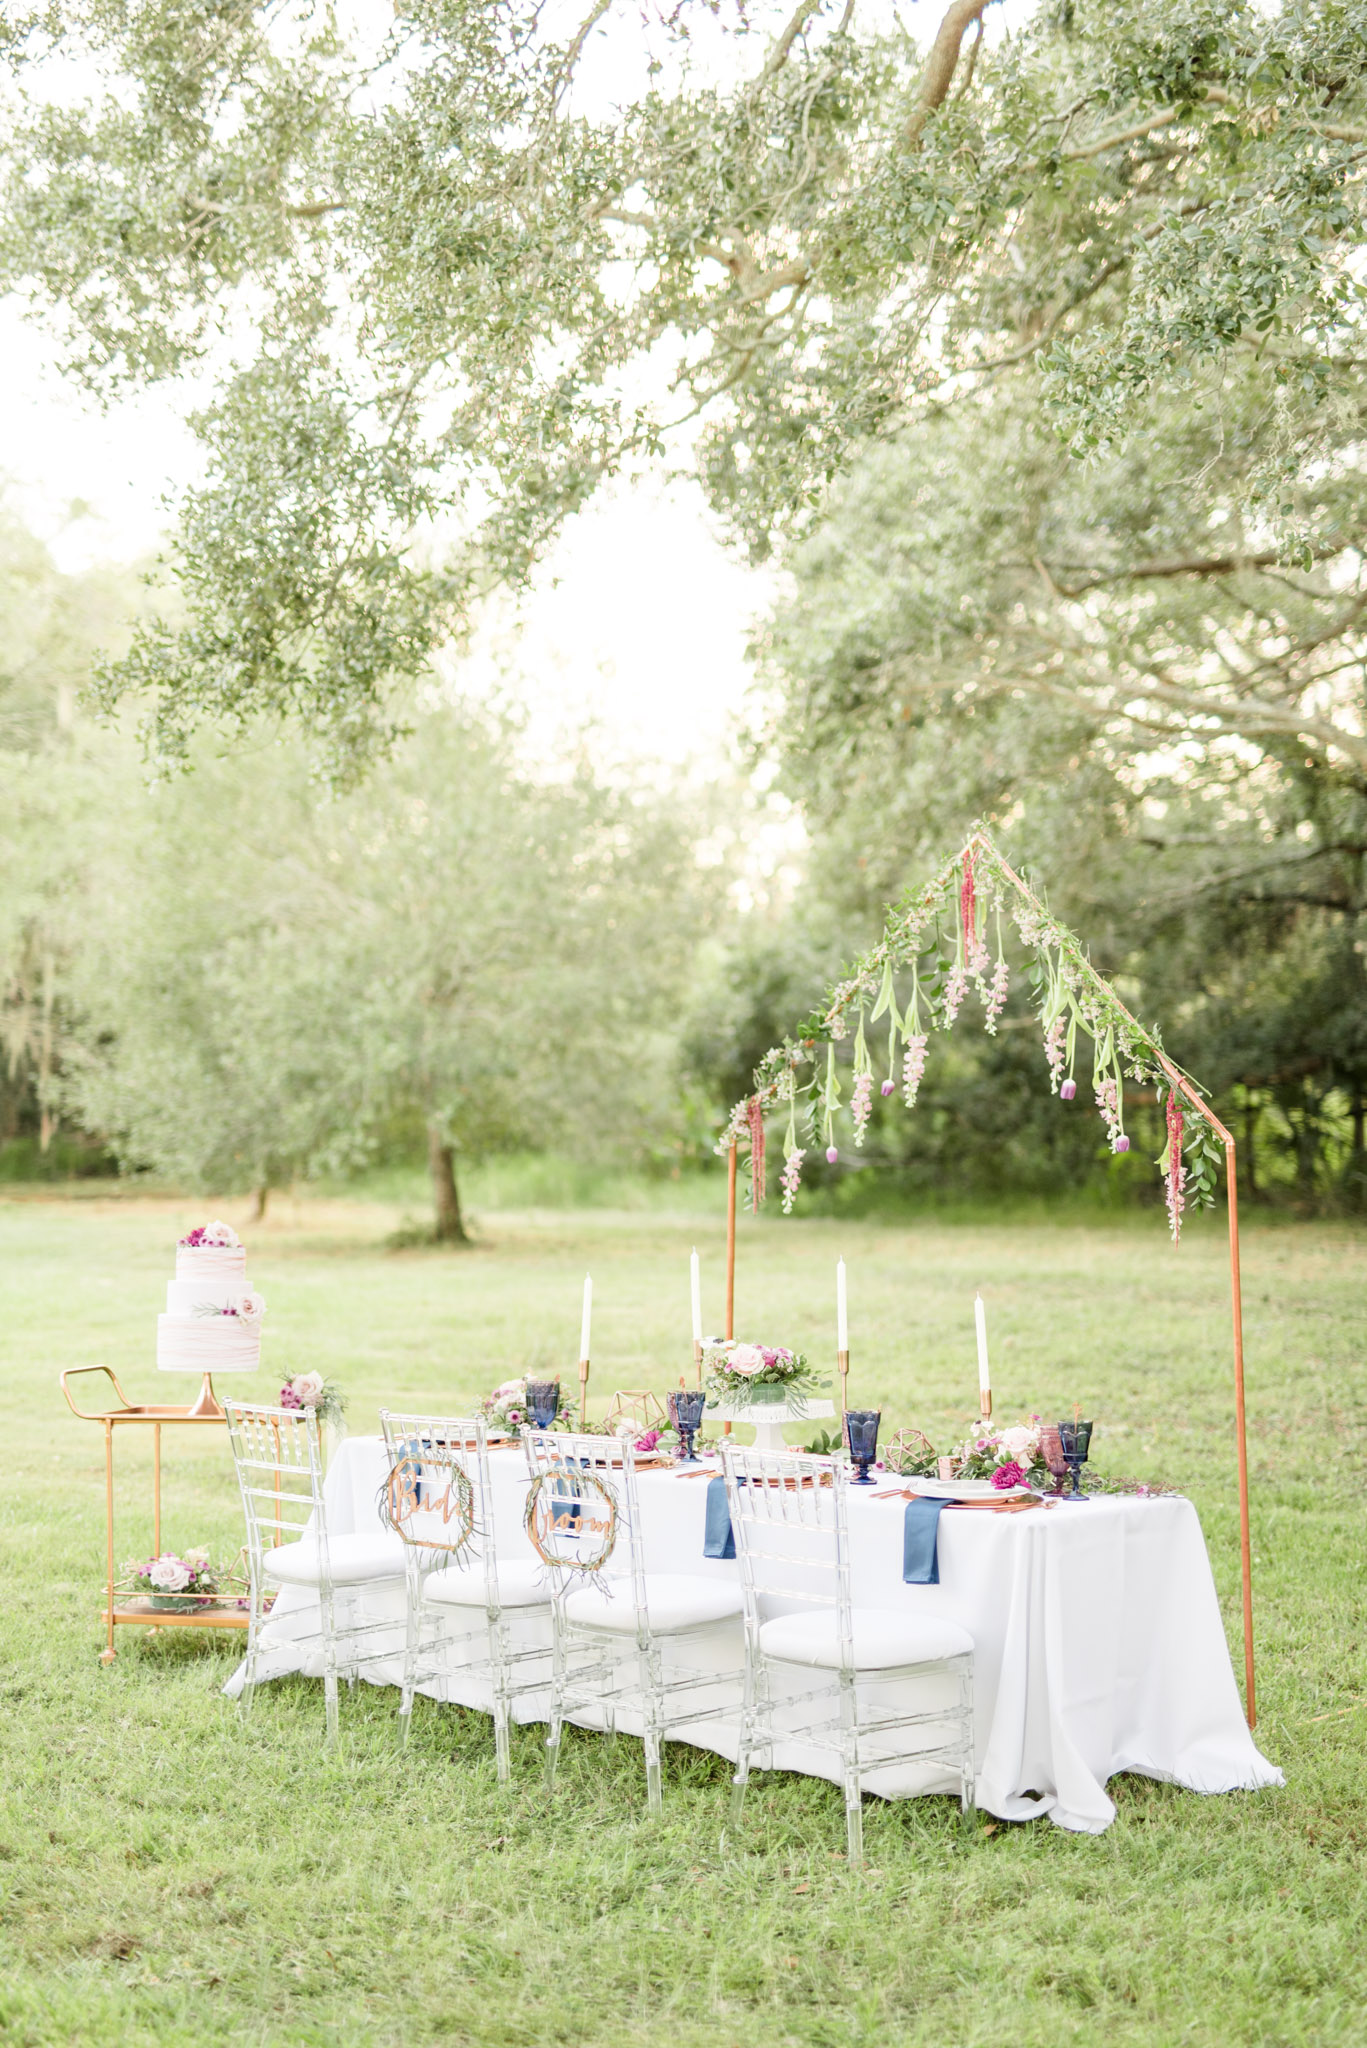 Reception table at elopement.